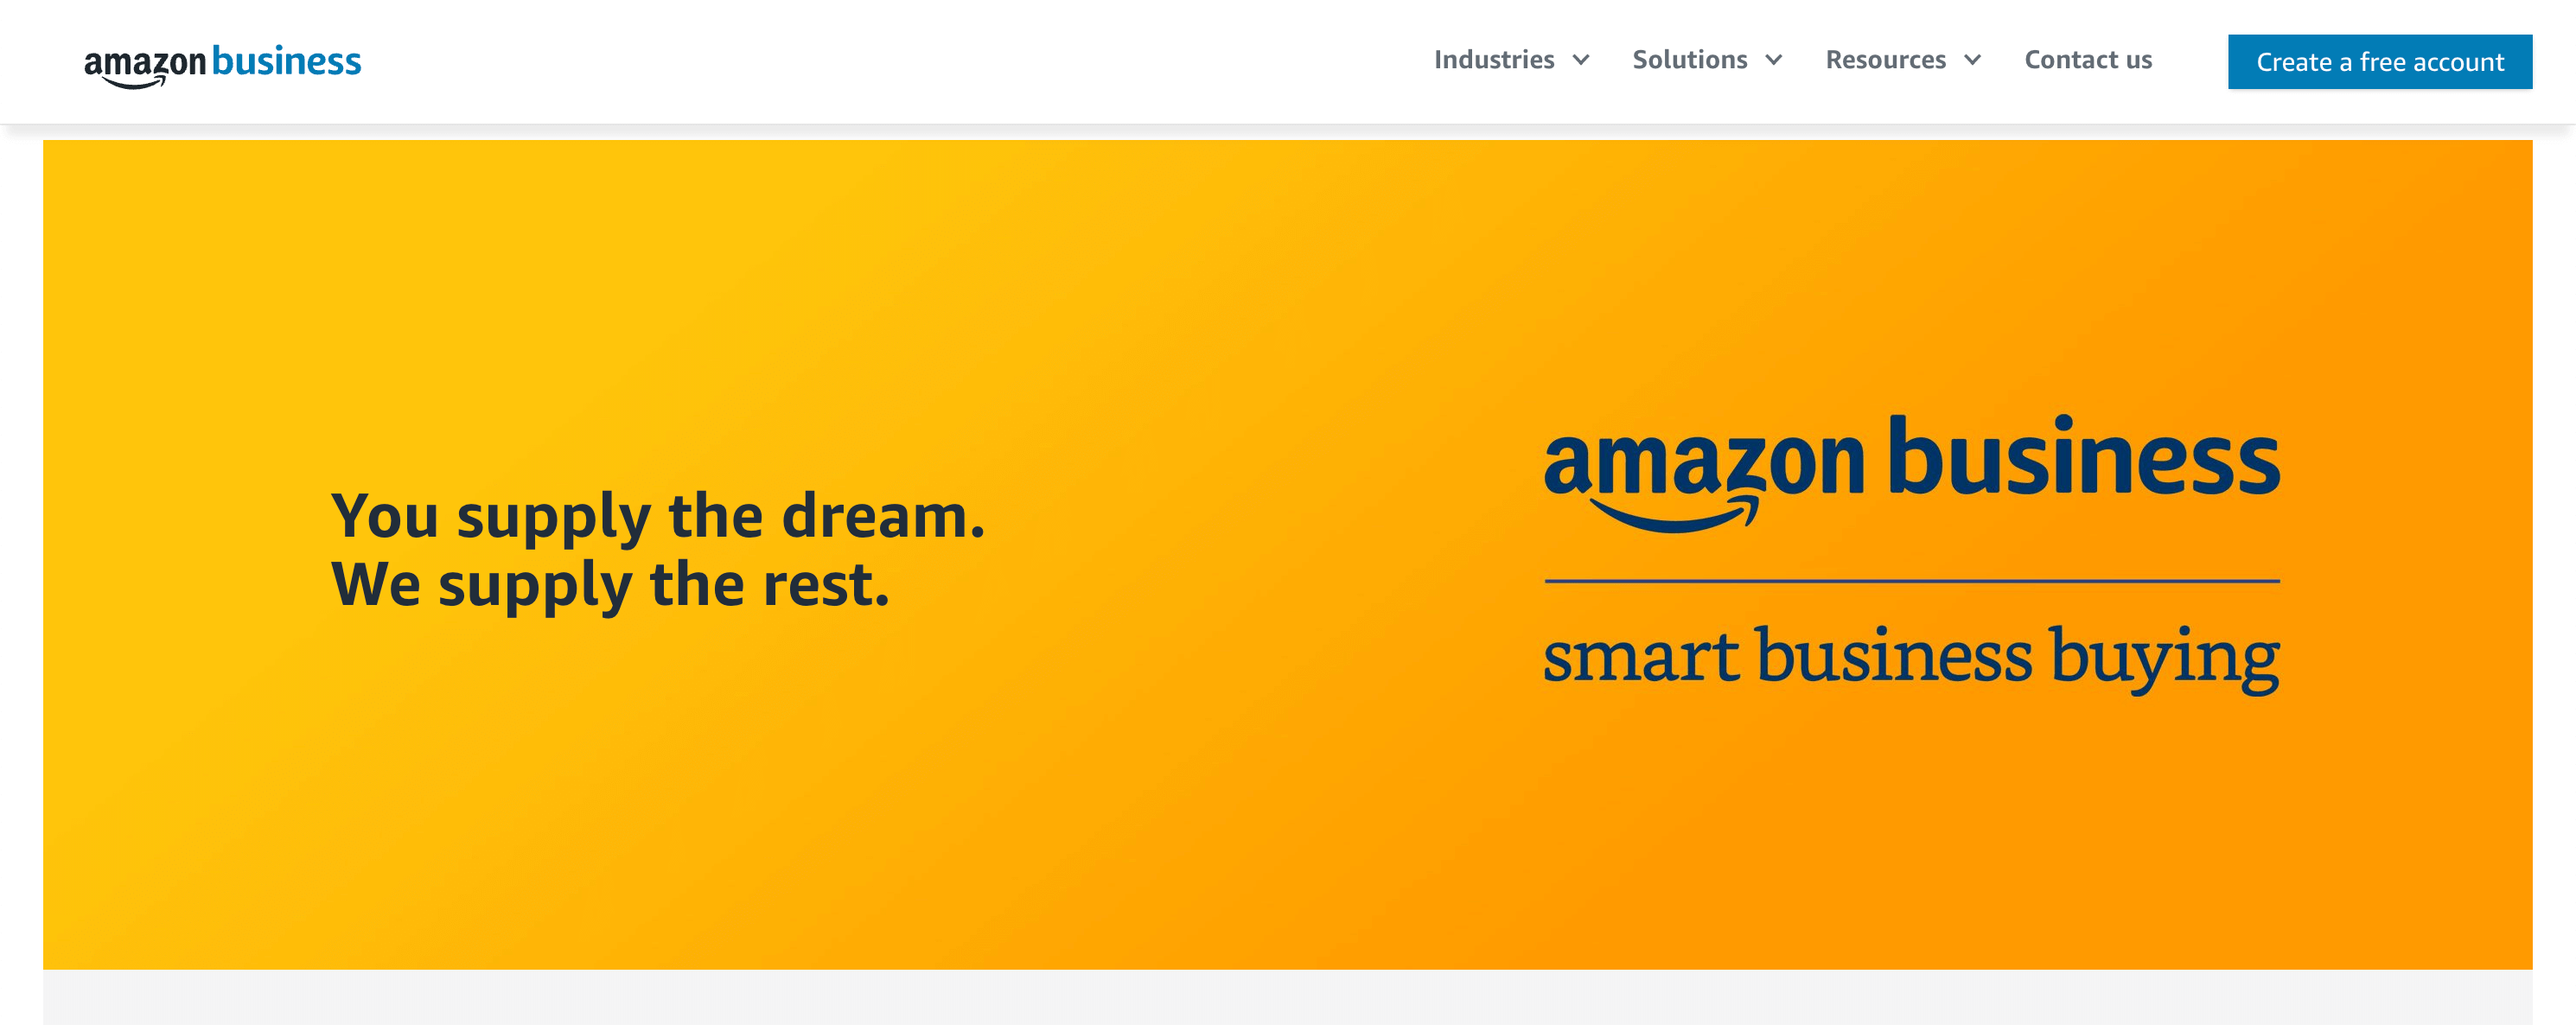 Amazon Business' home page